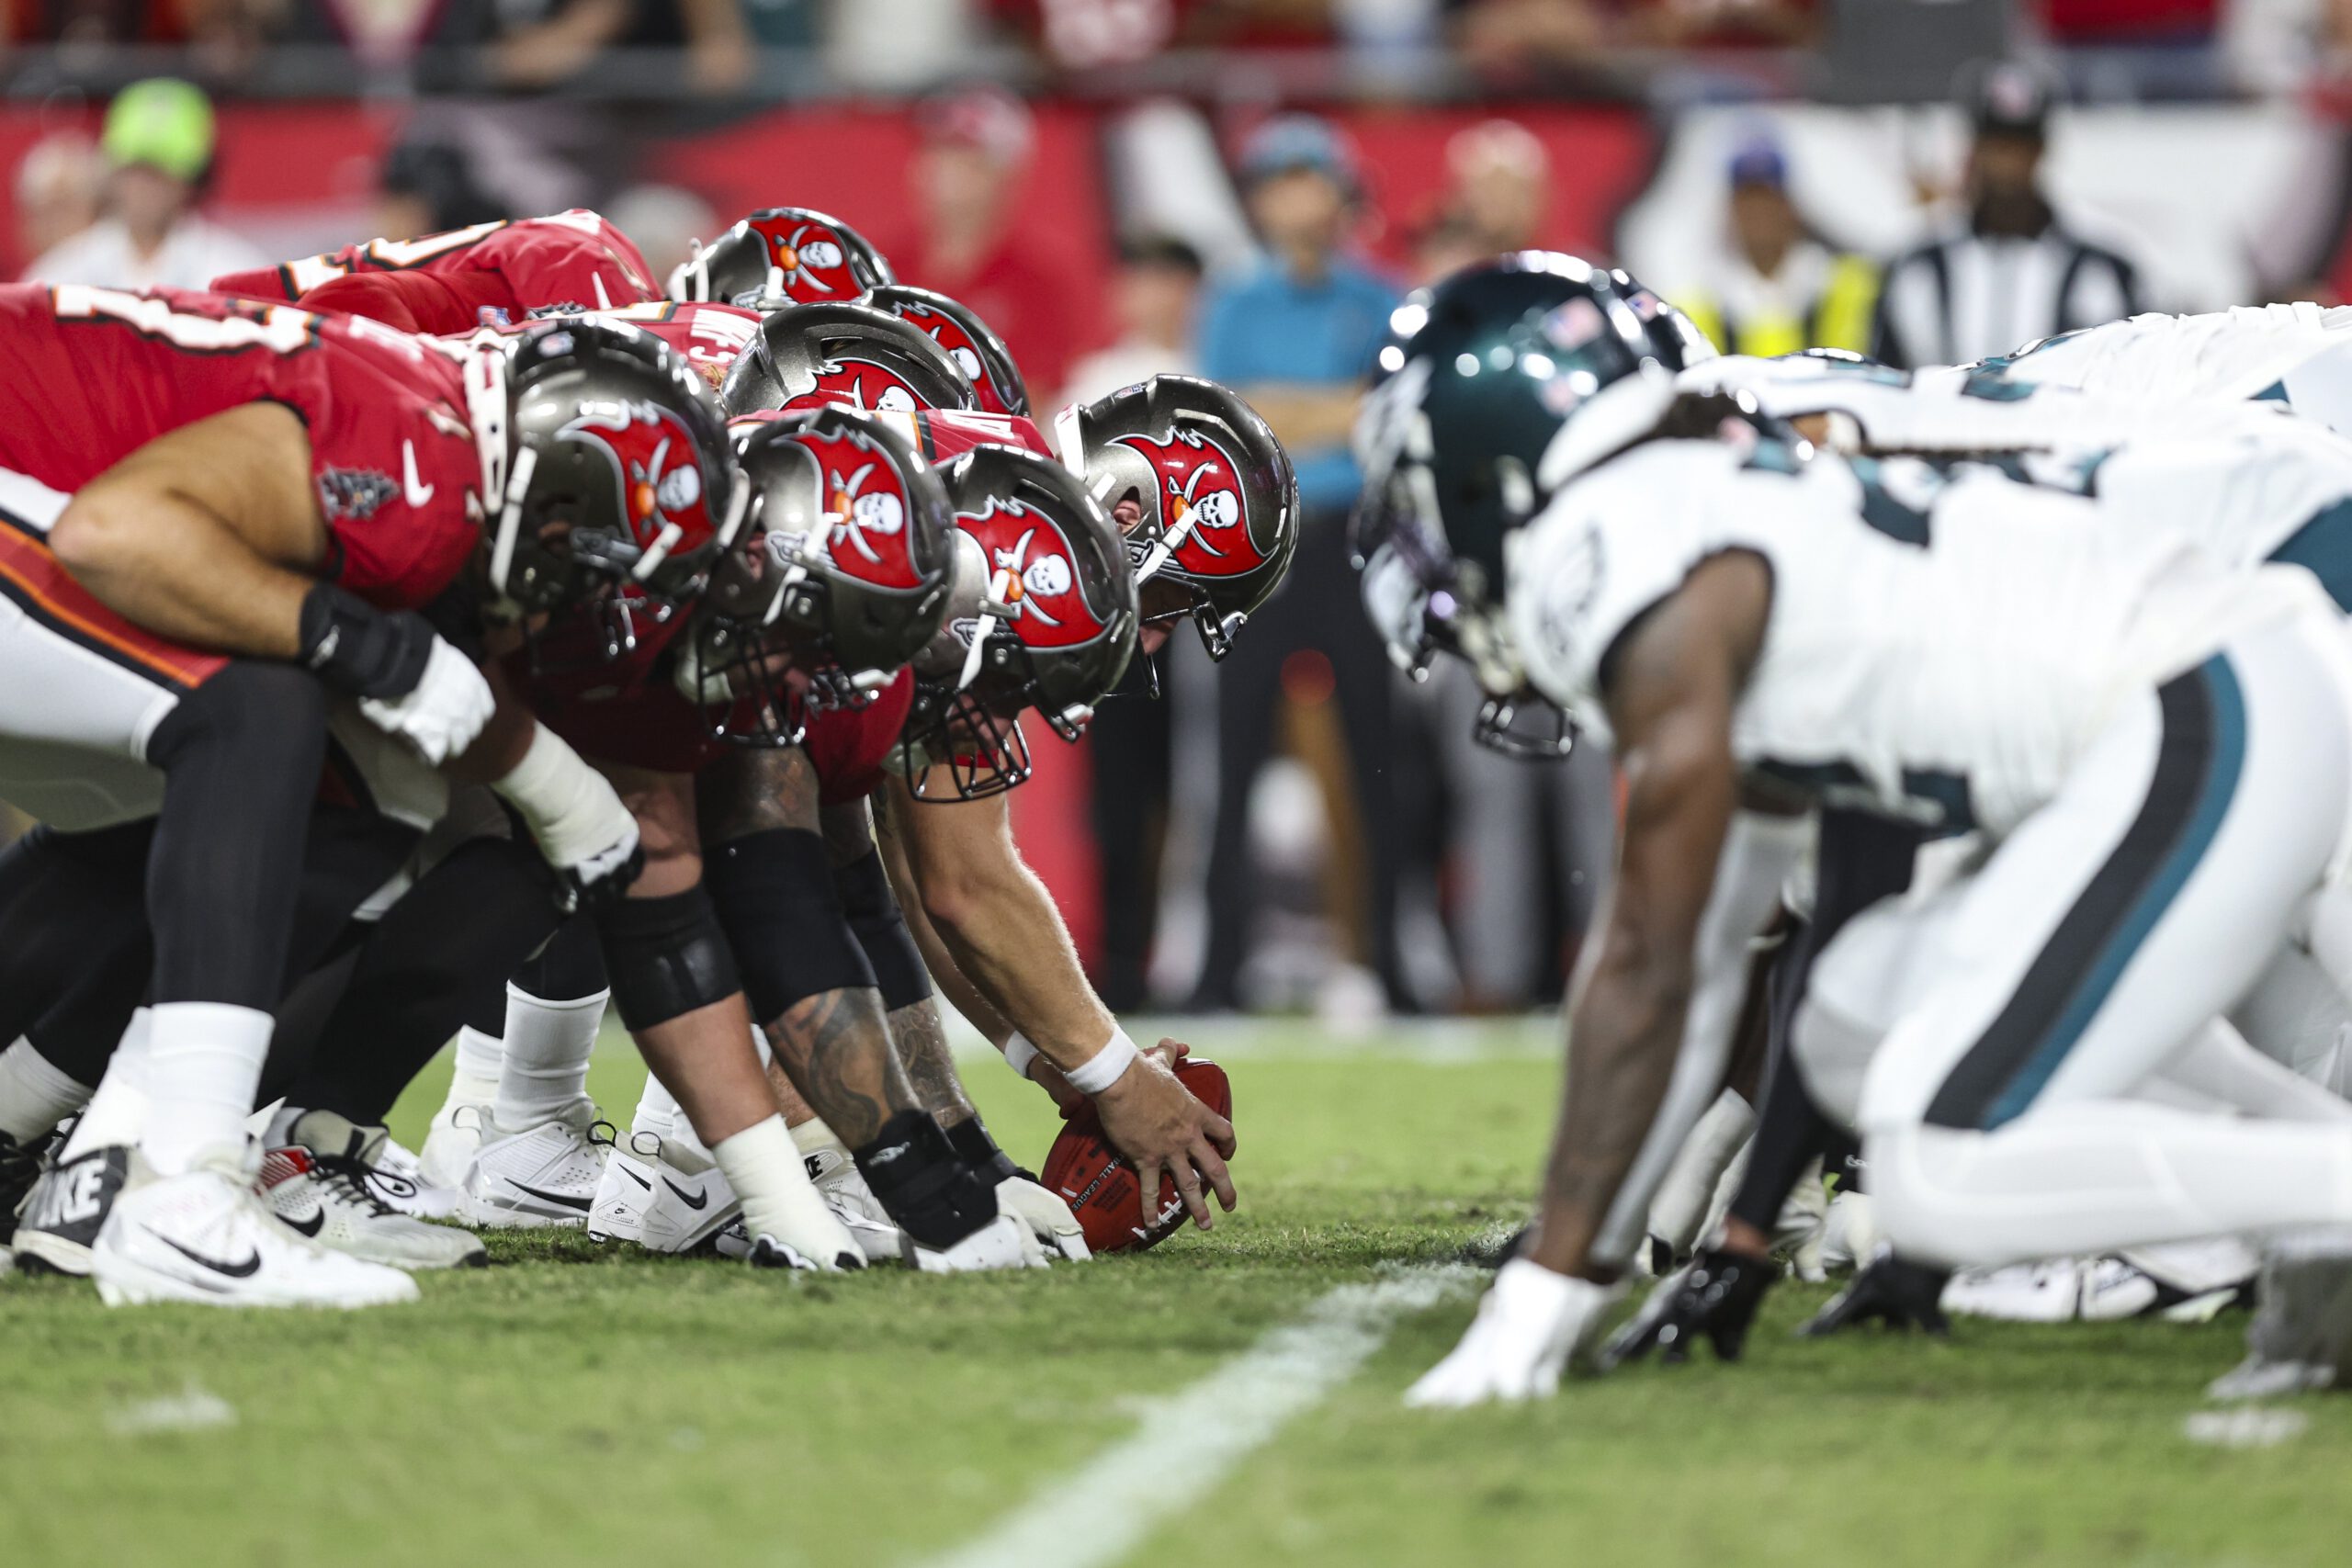 Eagles players line up on the field against the Buccaneers players.